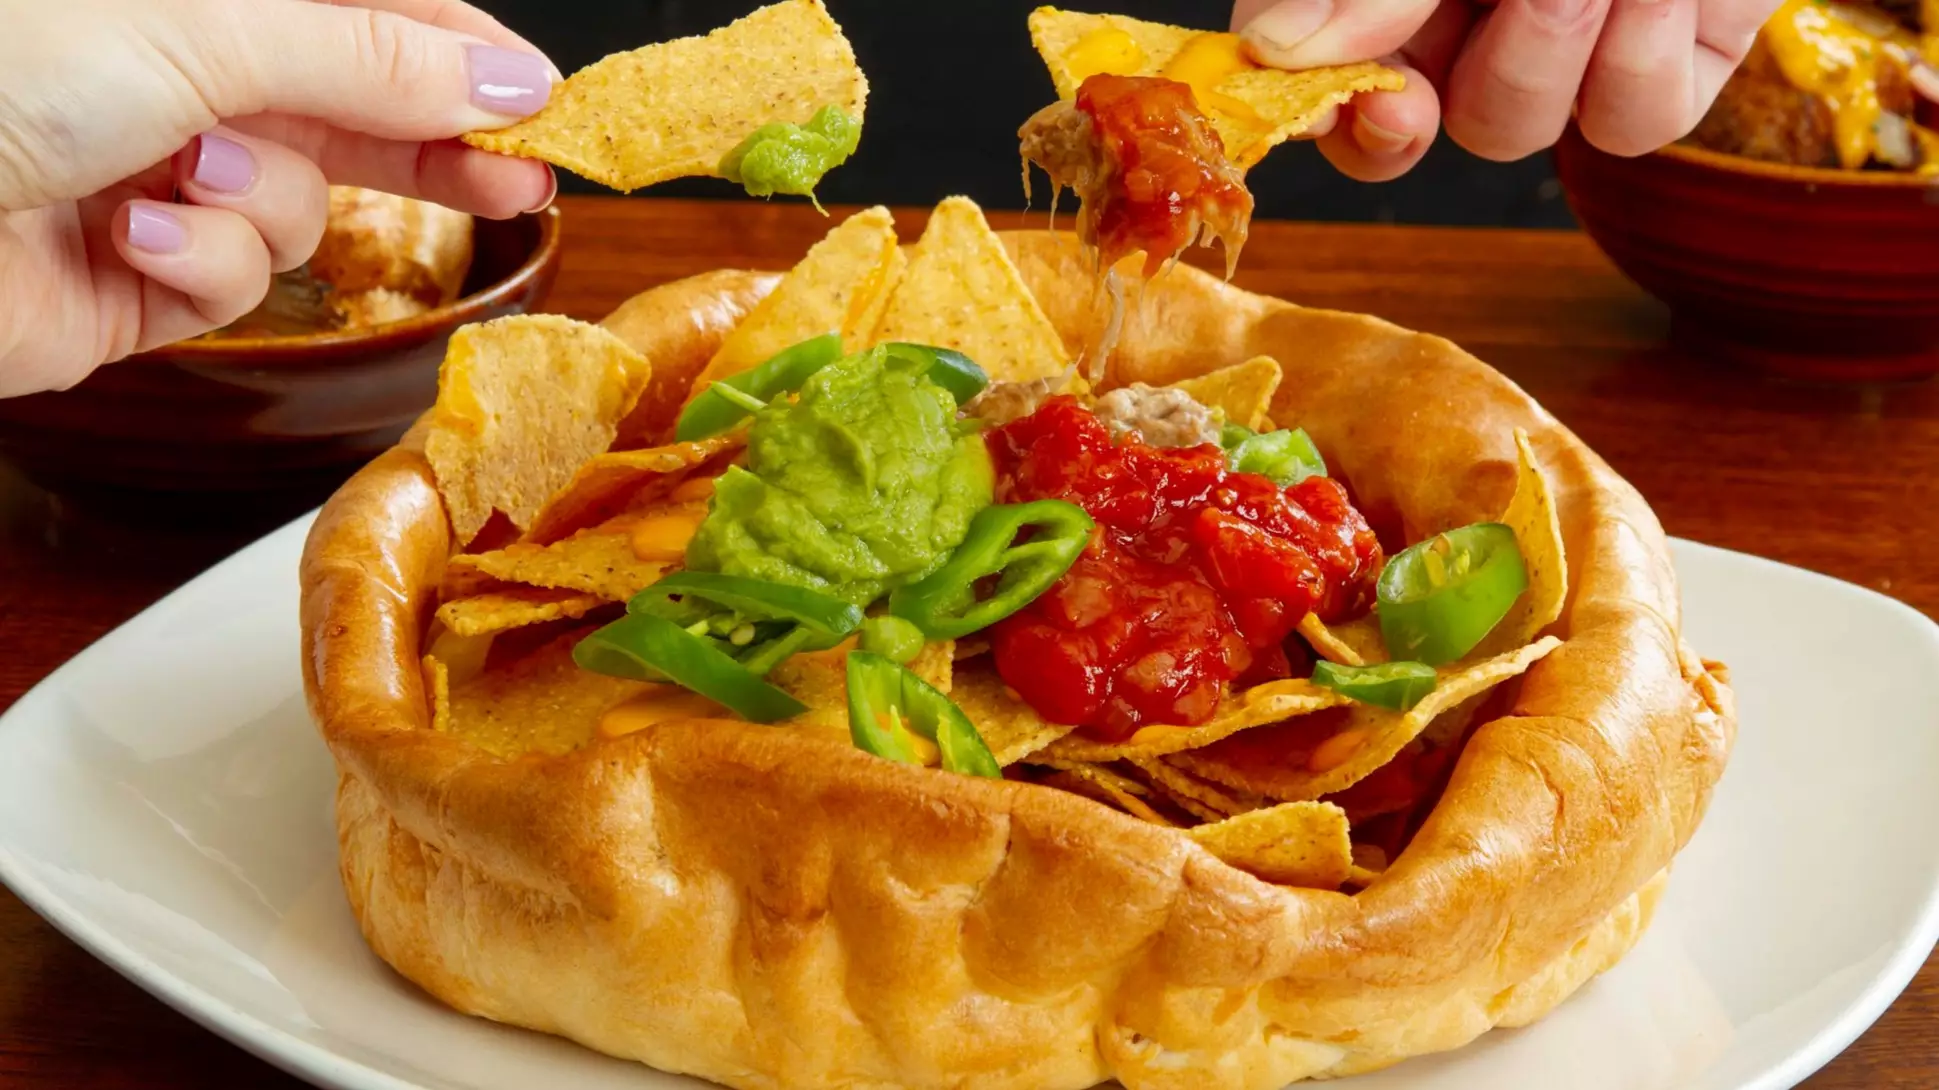 People Aren't Happy About Toby Carvery's Nacho Filled Yorkshire Pudding 